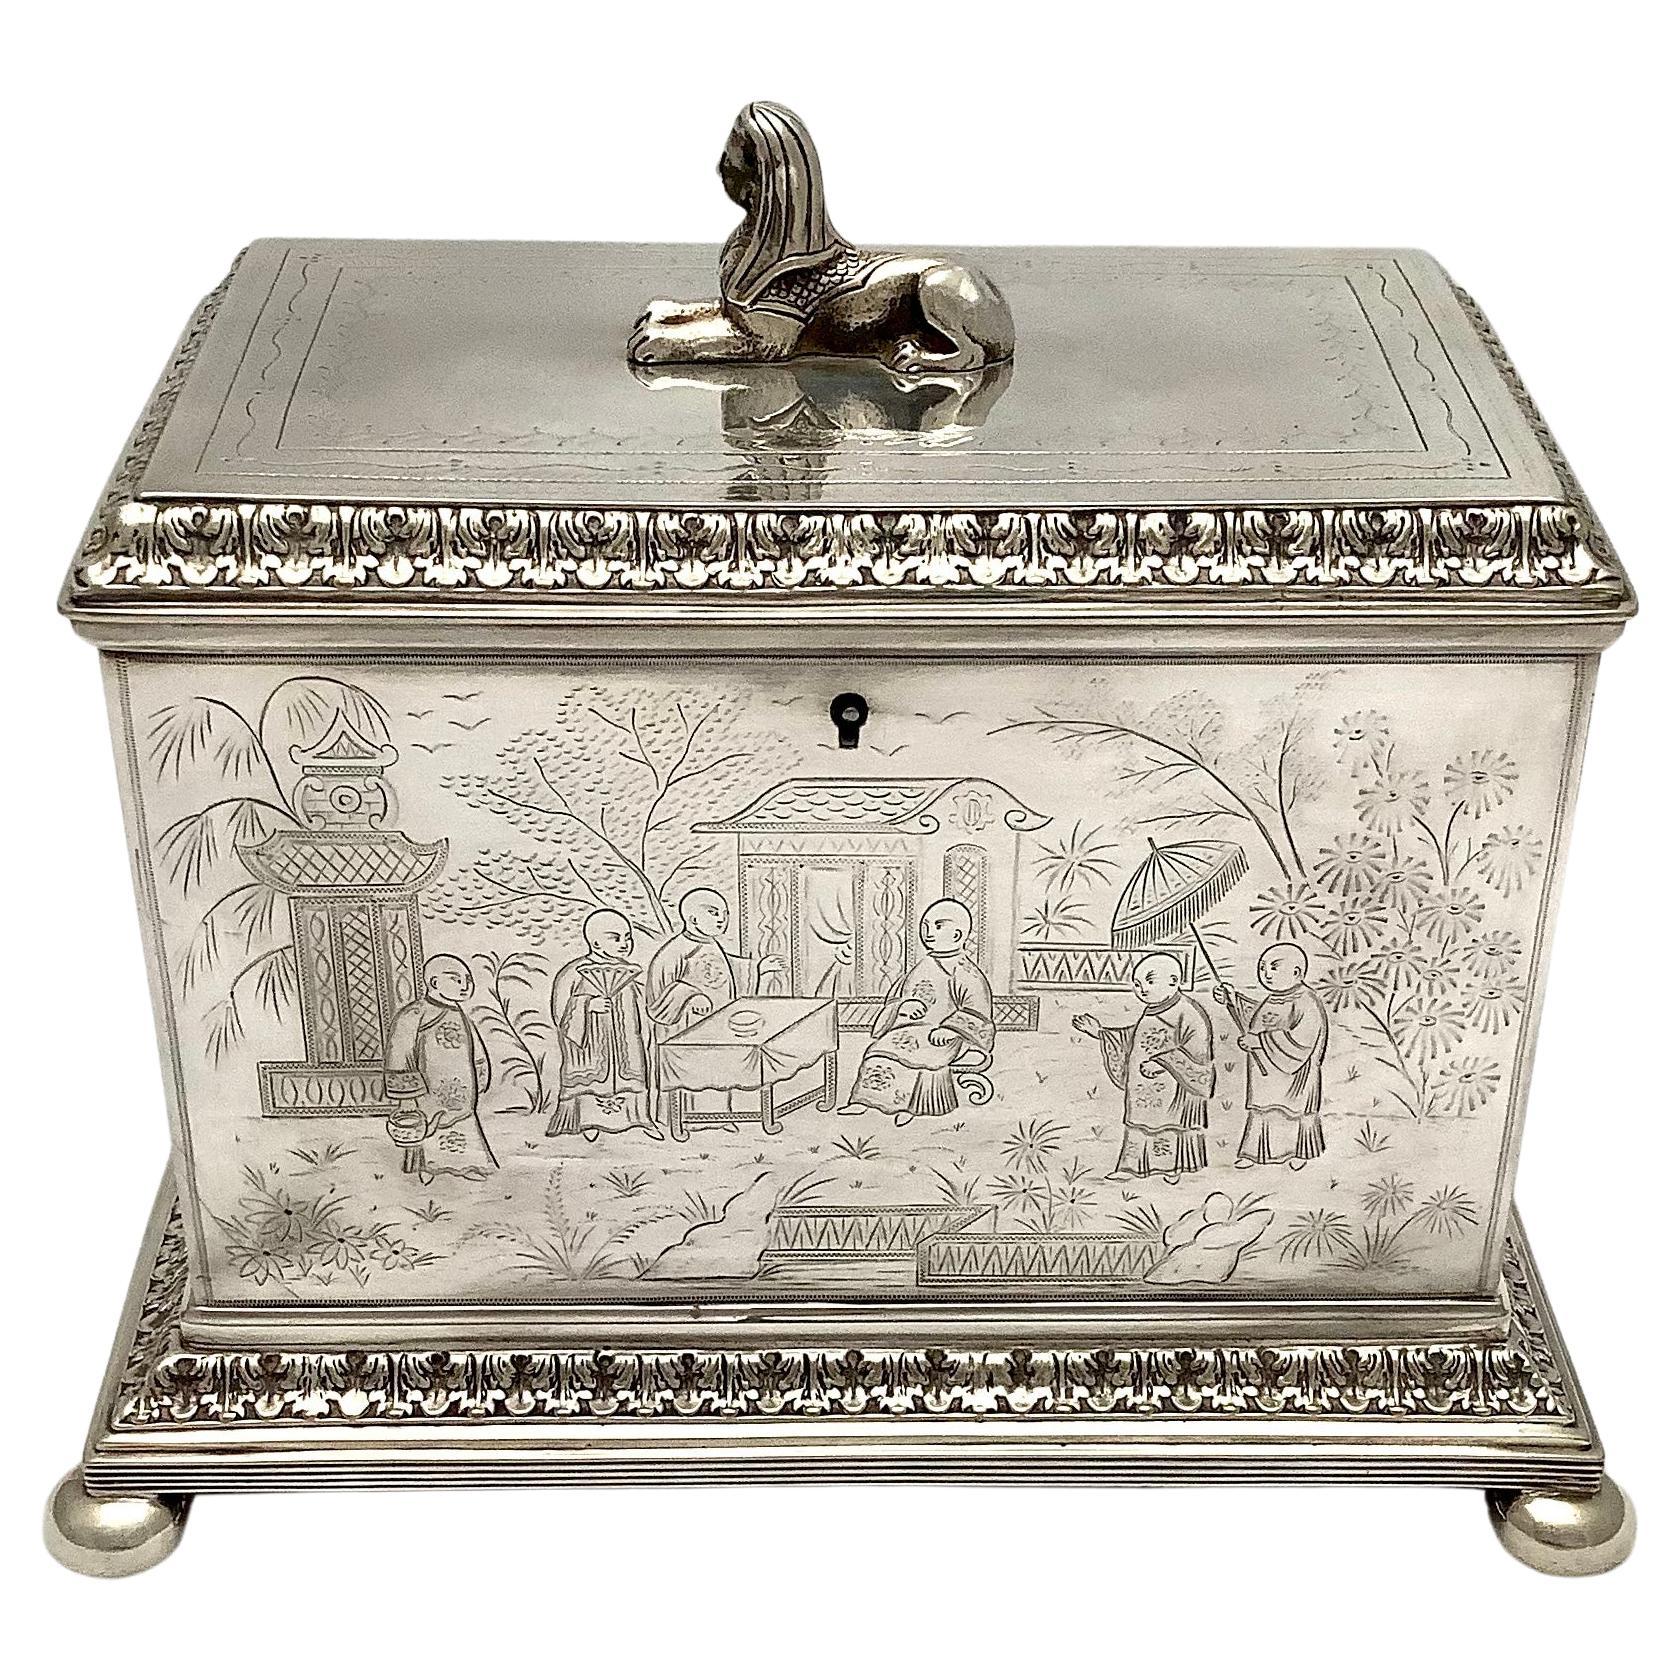 Silver Box with Asian Decorative Engraving